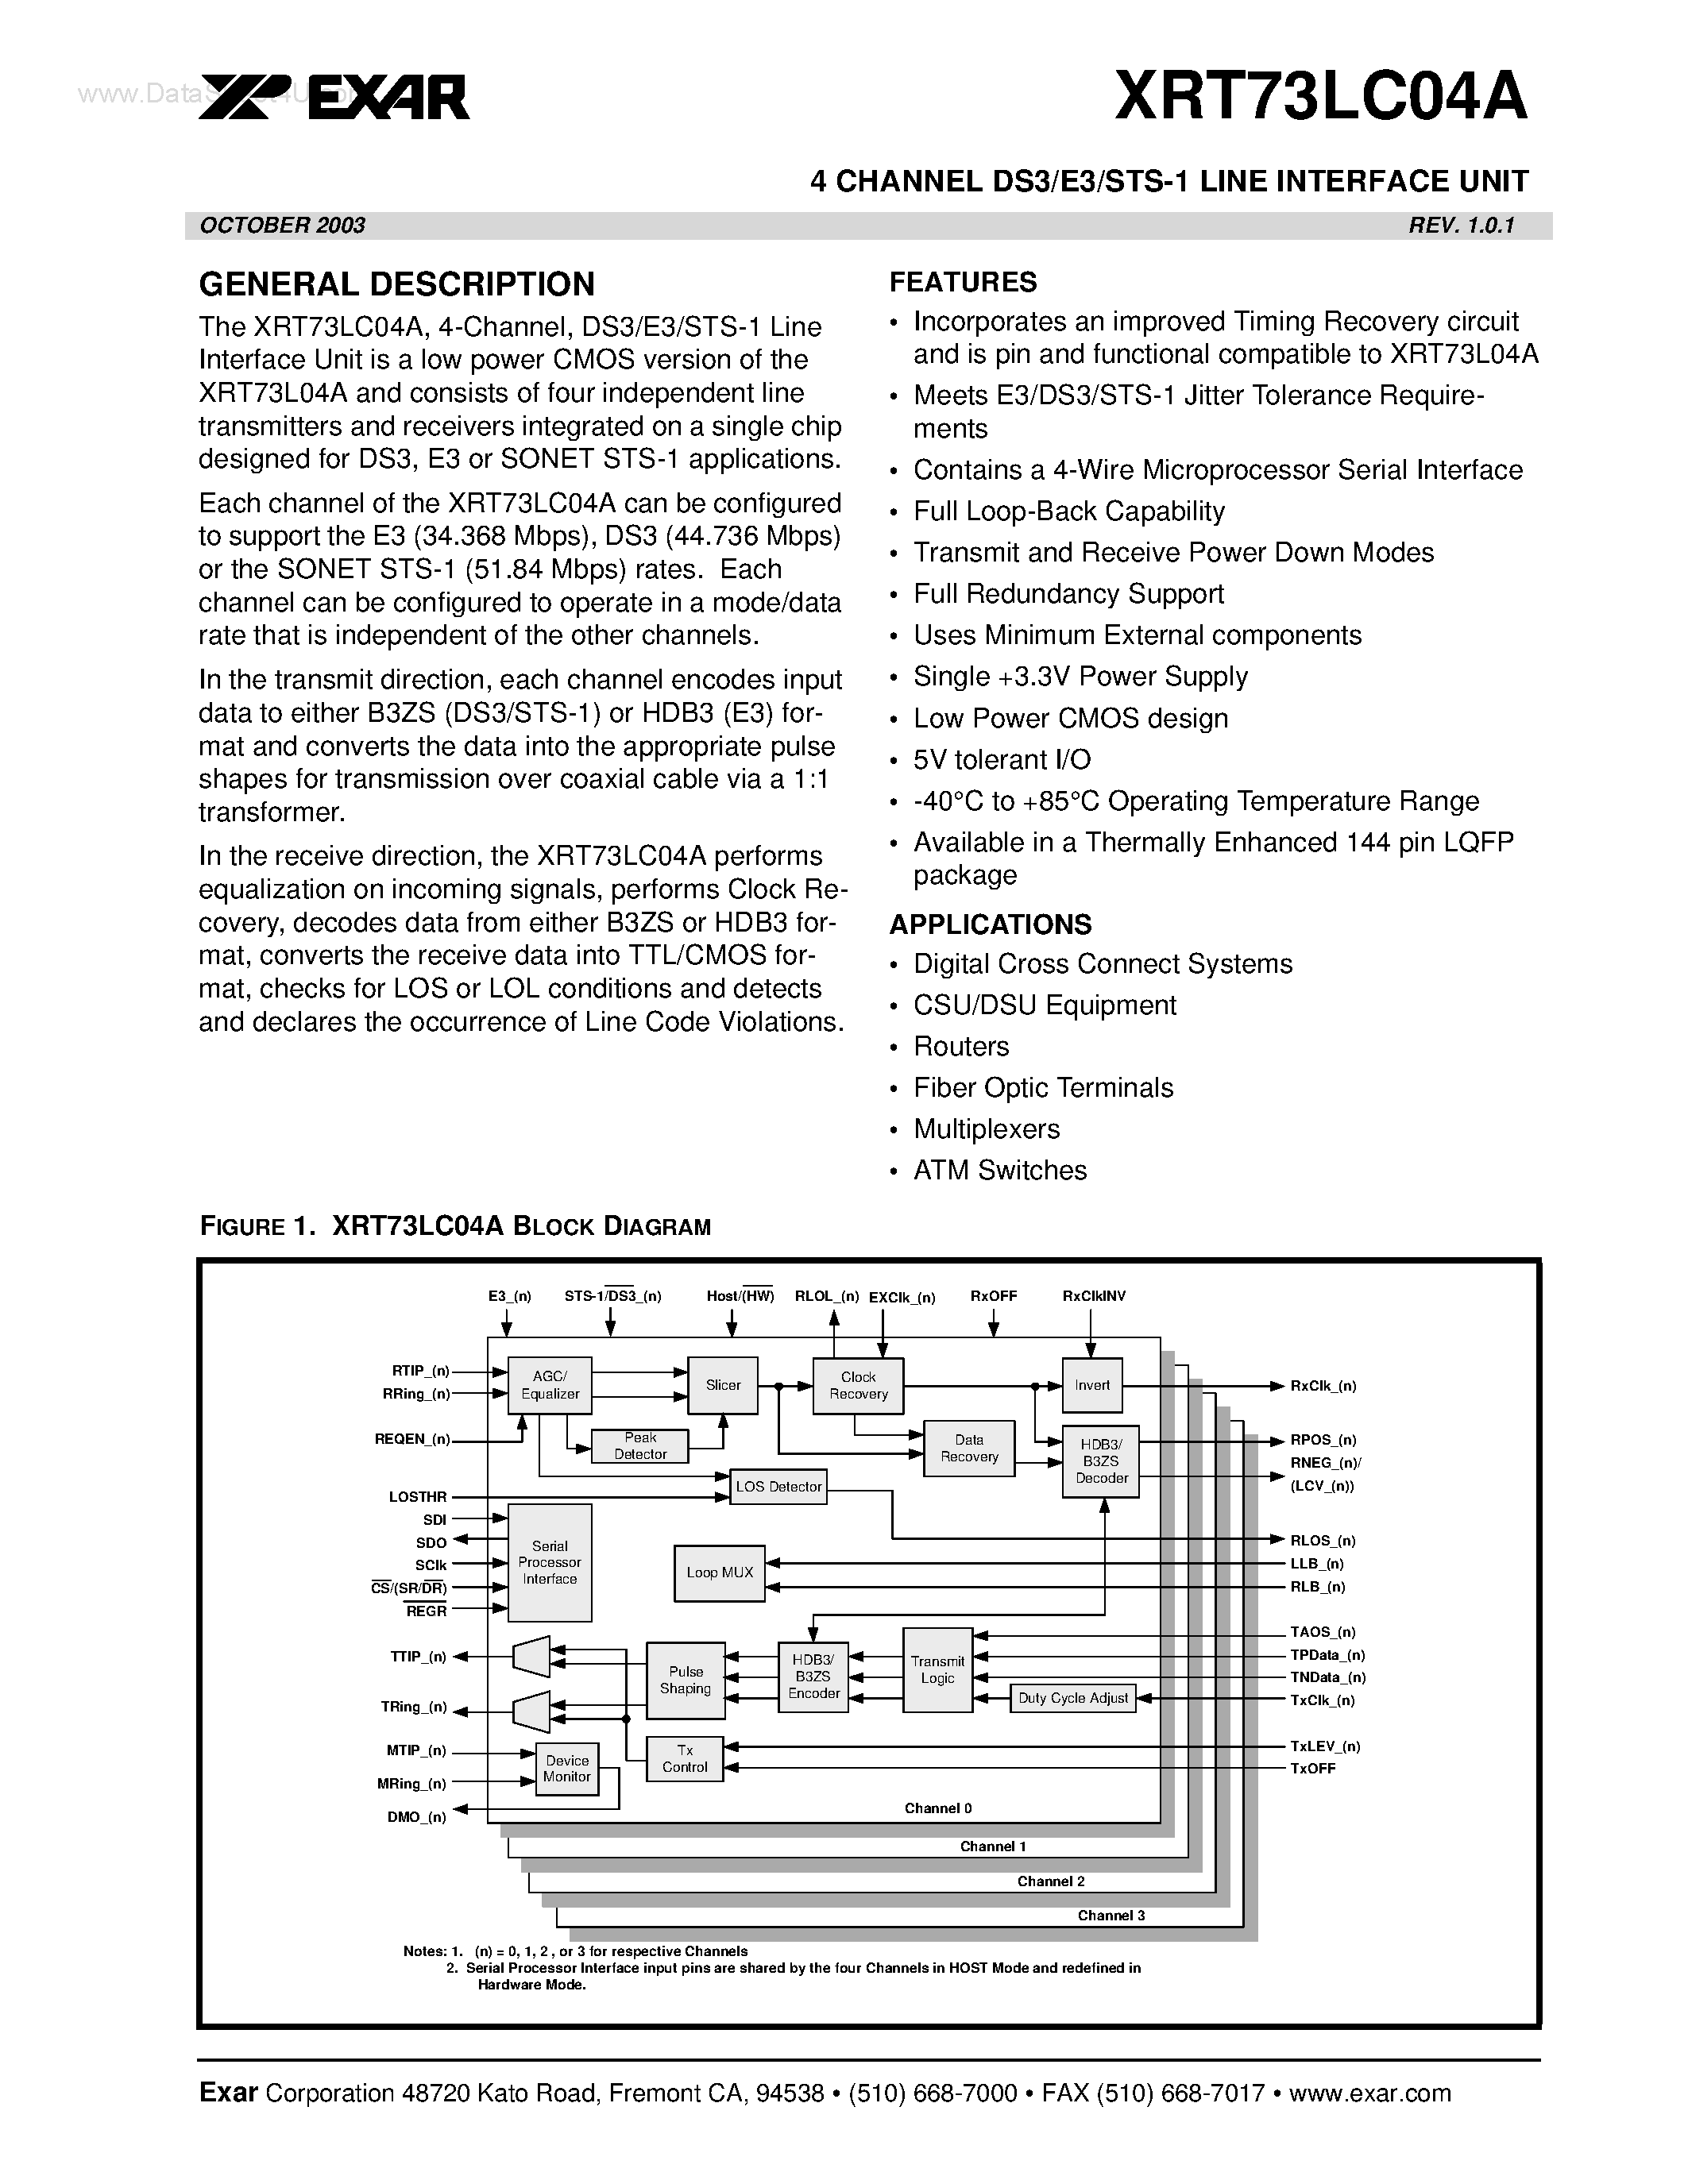 Datasheet XRT73LC04A - 4 CHANNEL DS3/E3/STS-1 LINE INTERFACE UNIT page 1